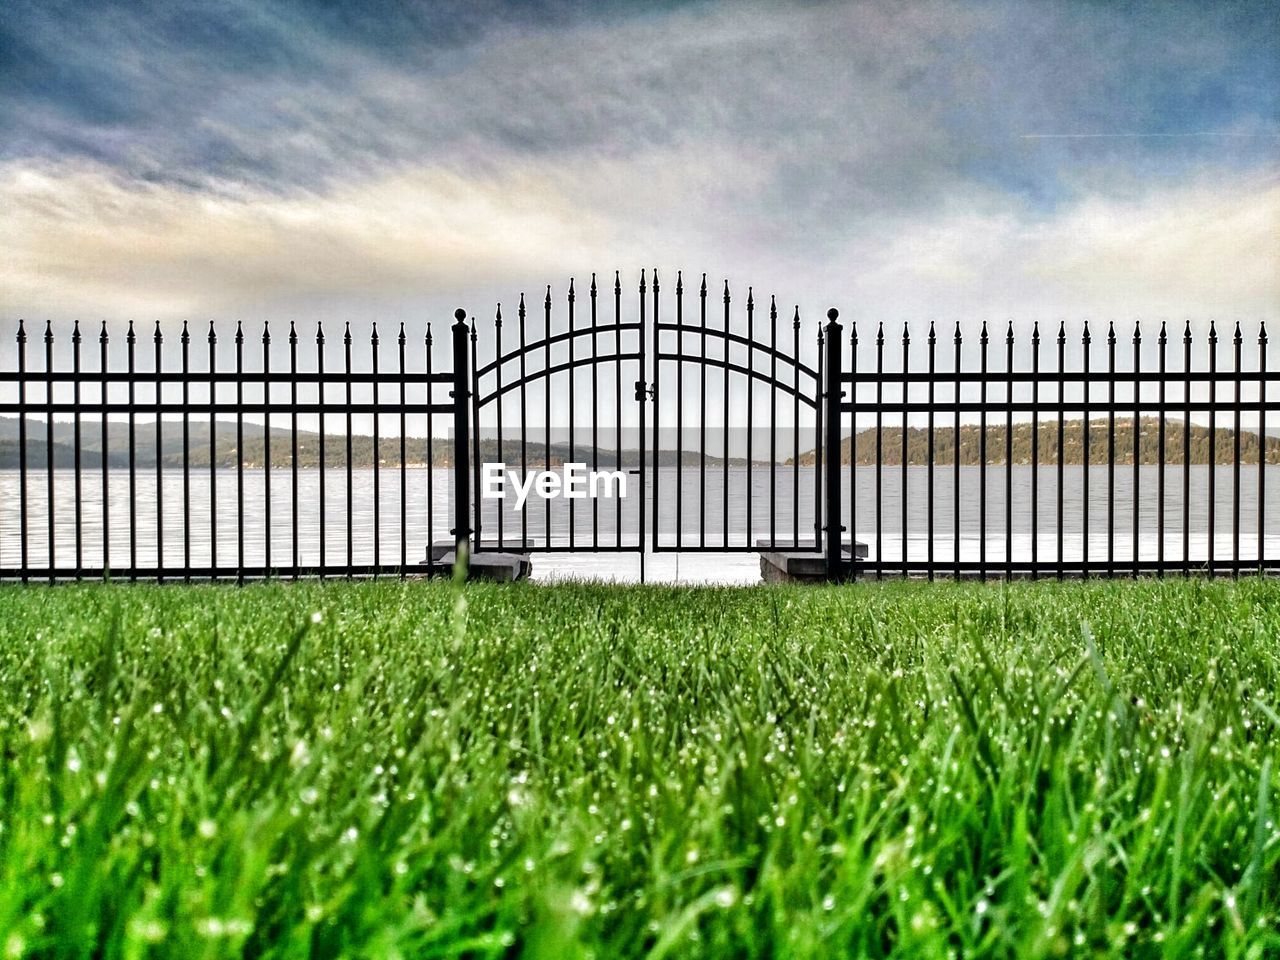 Metallic gate on grassy field by lake against cloudy sky